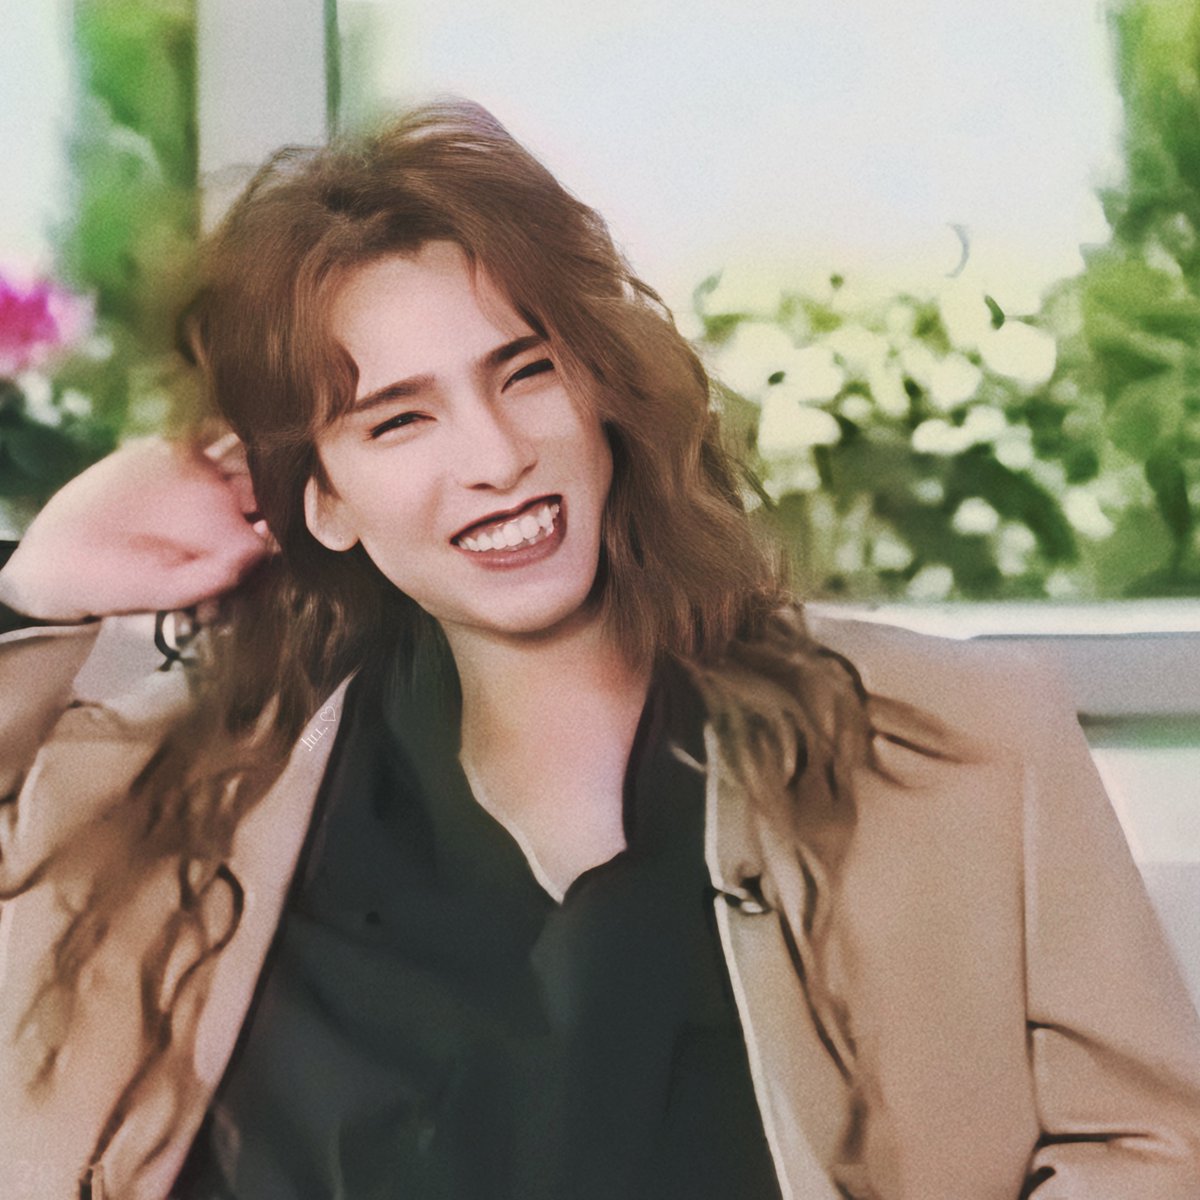 People said old YOSHIKI was scary, I can't relate with this face and this smile.💓

The real scary thing is we don't hear from you... I hope you're doing well & I believe you can handle all your hardship. It just takes time. 
#YOSHIKI #StayWell 💖✨